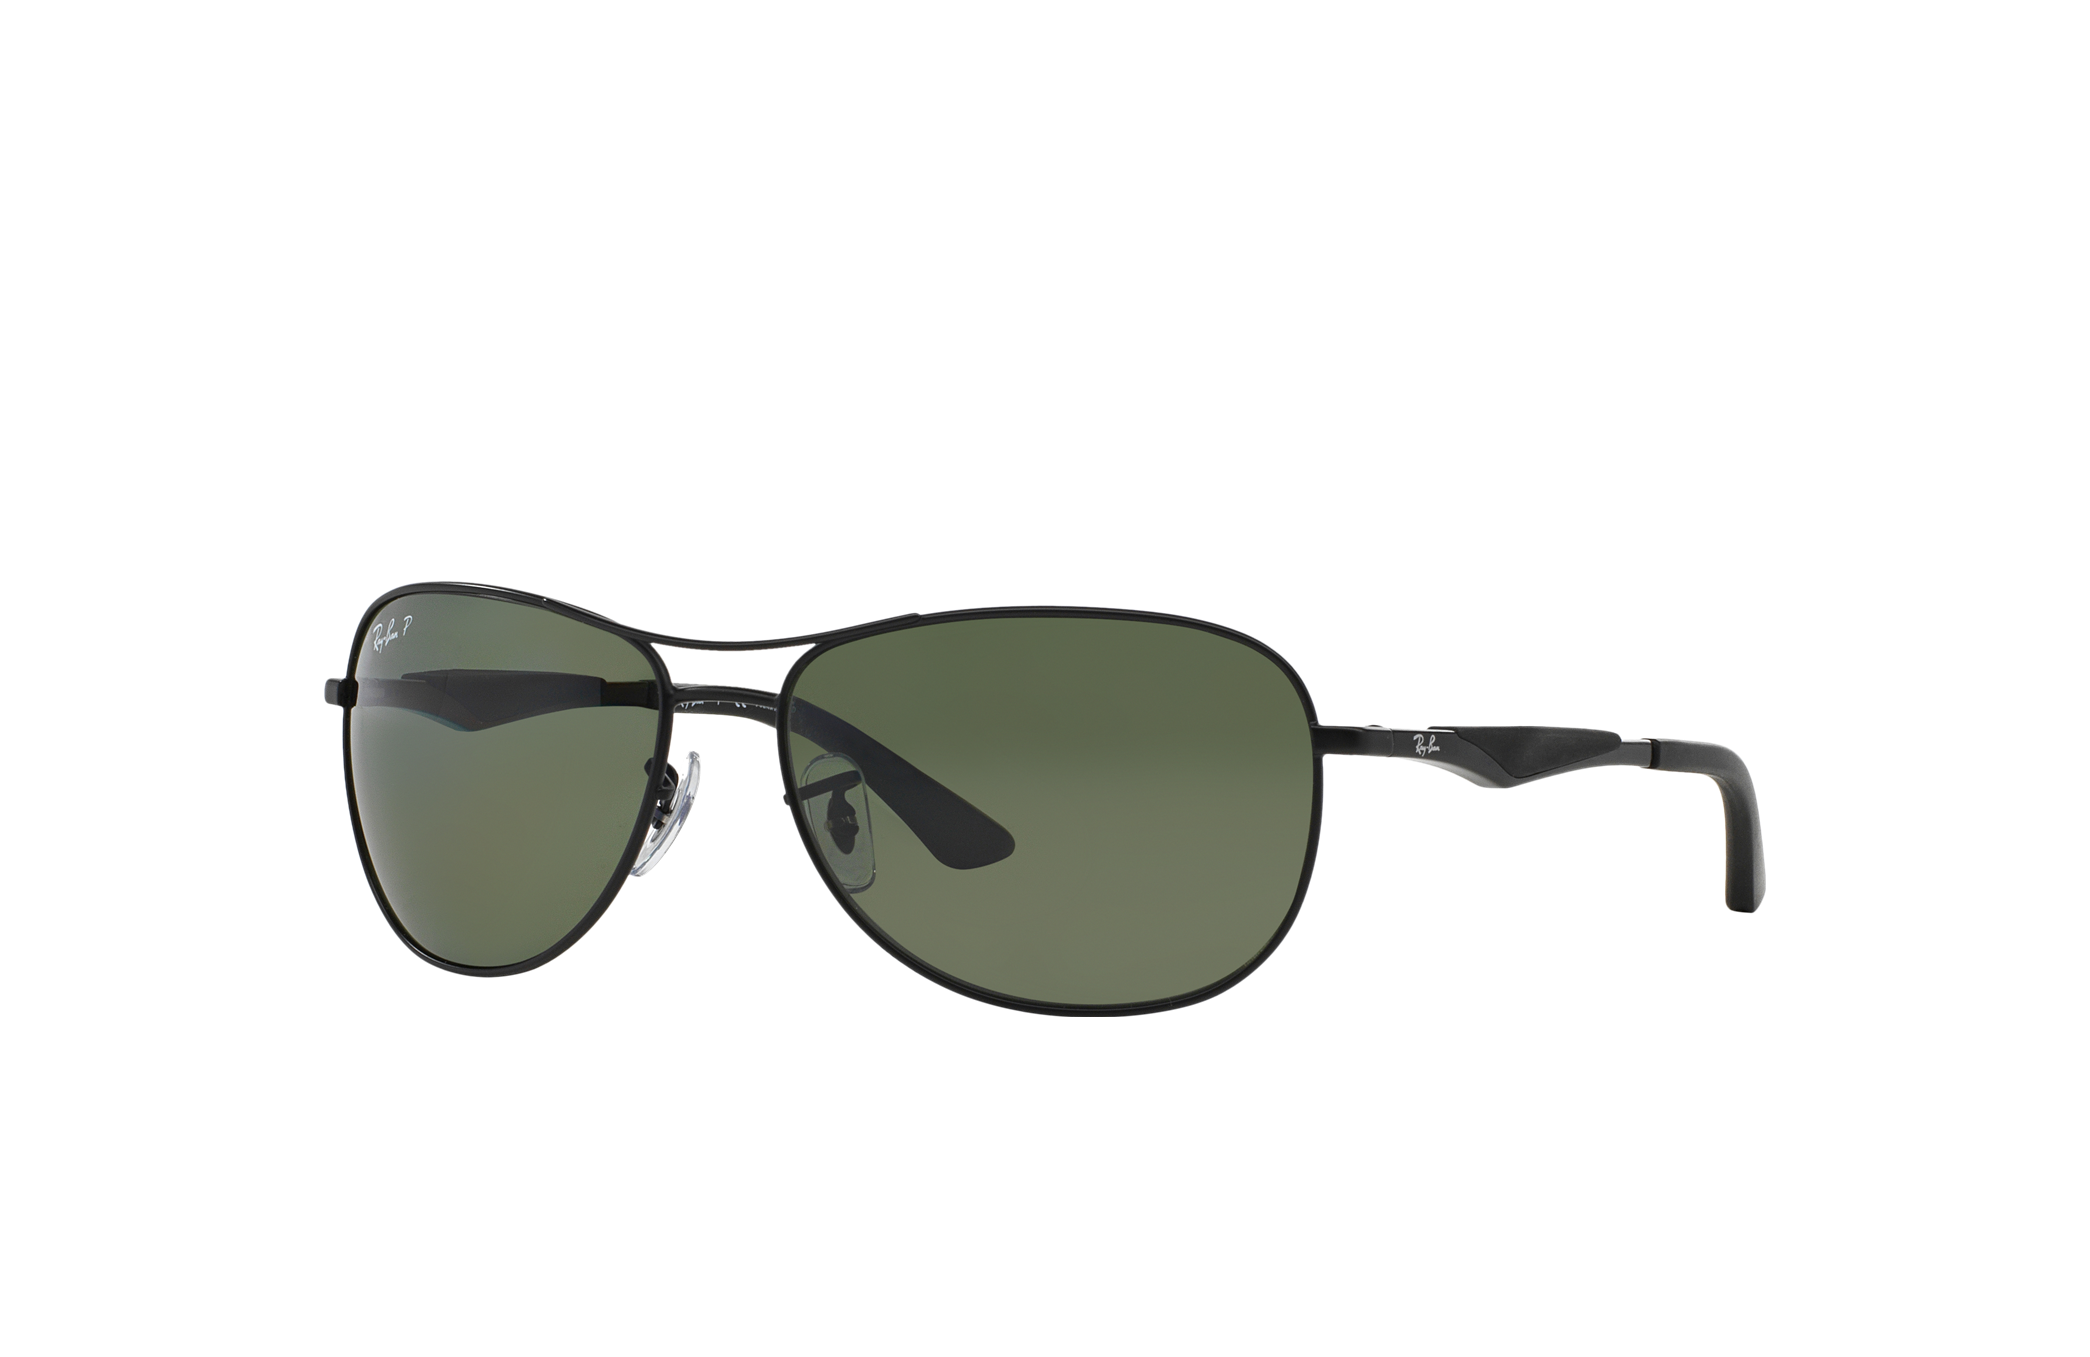 Rb3519 Sunglasses in Black and Green | Ray-Ban®